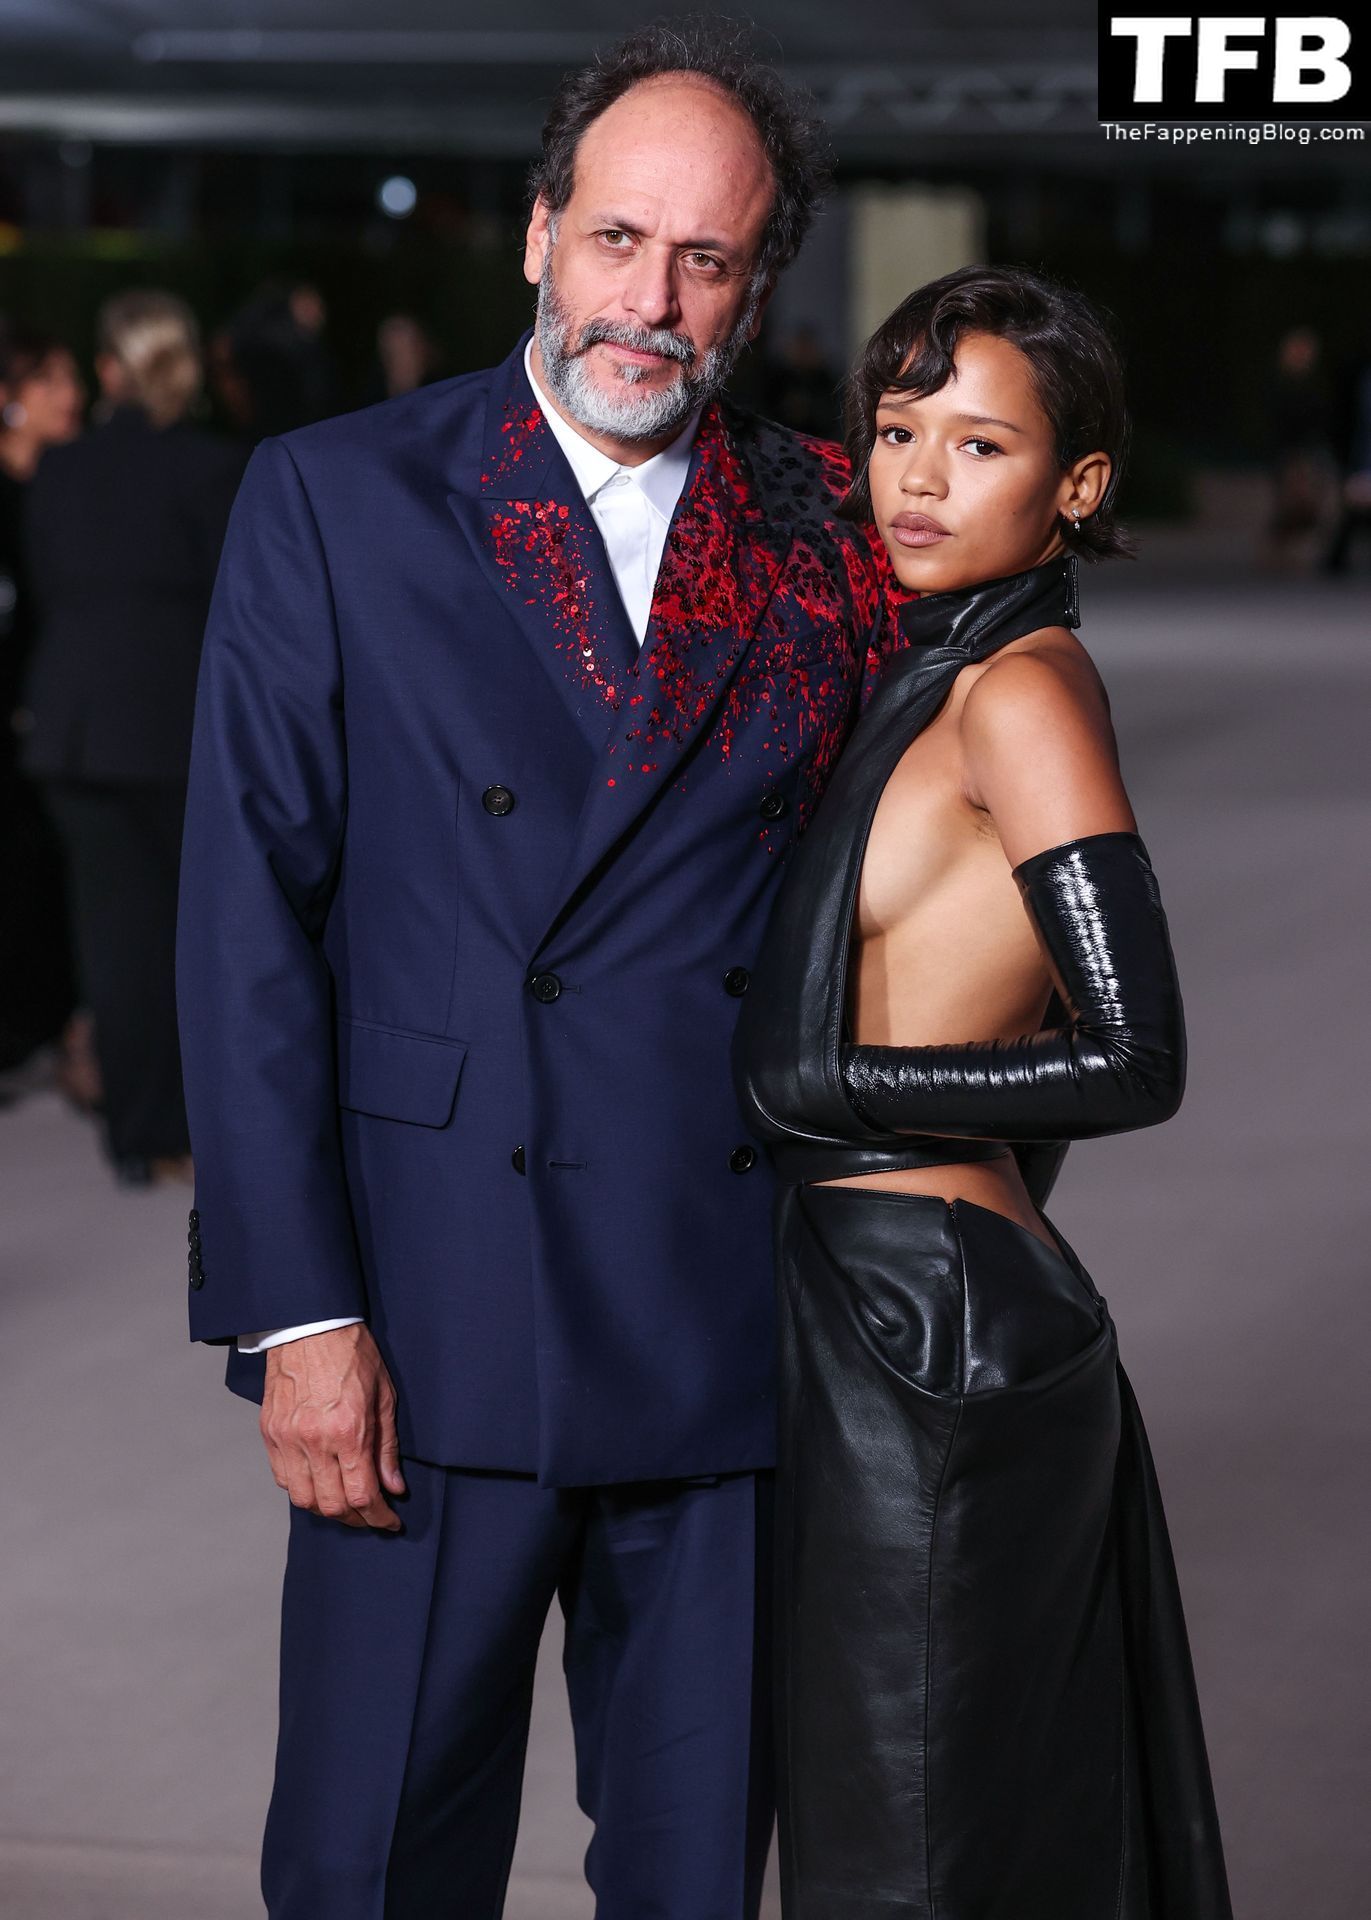 Taylor Russell Sexy Tits The Fappening Blog 5 - Taylor Russell Shows Off Her Sideboob at the 2nd Annual Academy Museum Gala in LA (21 Photos)